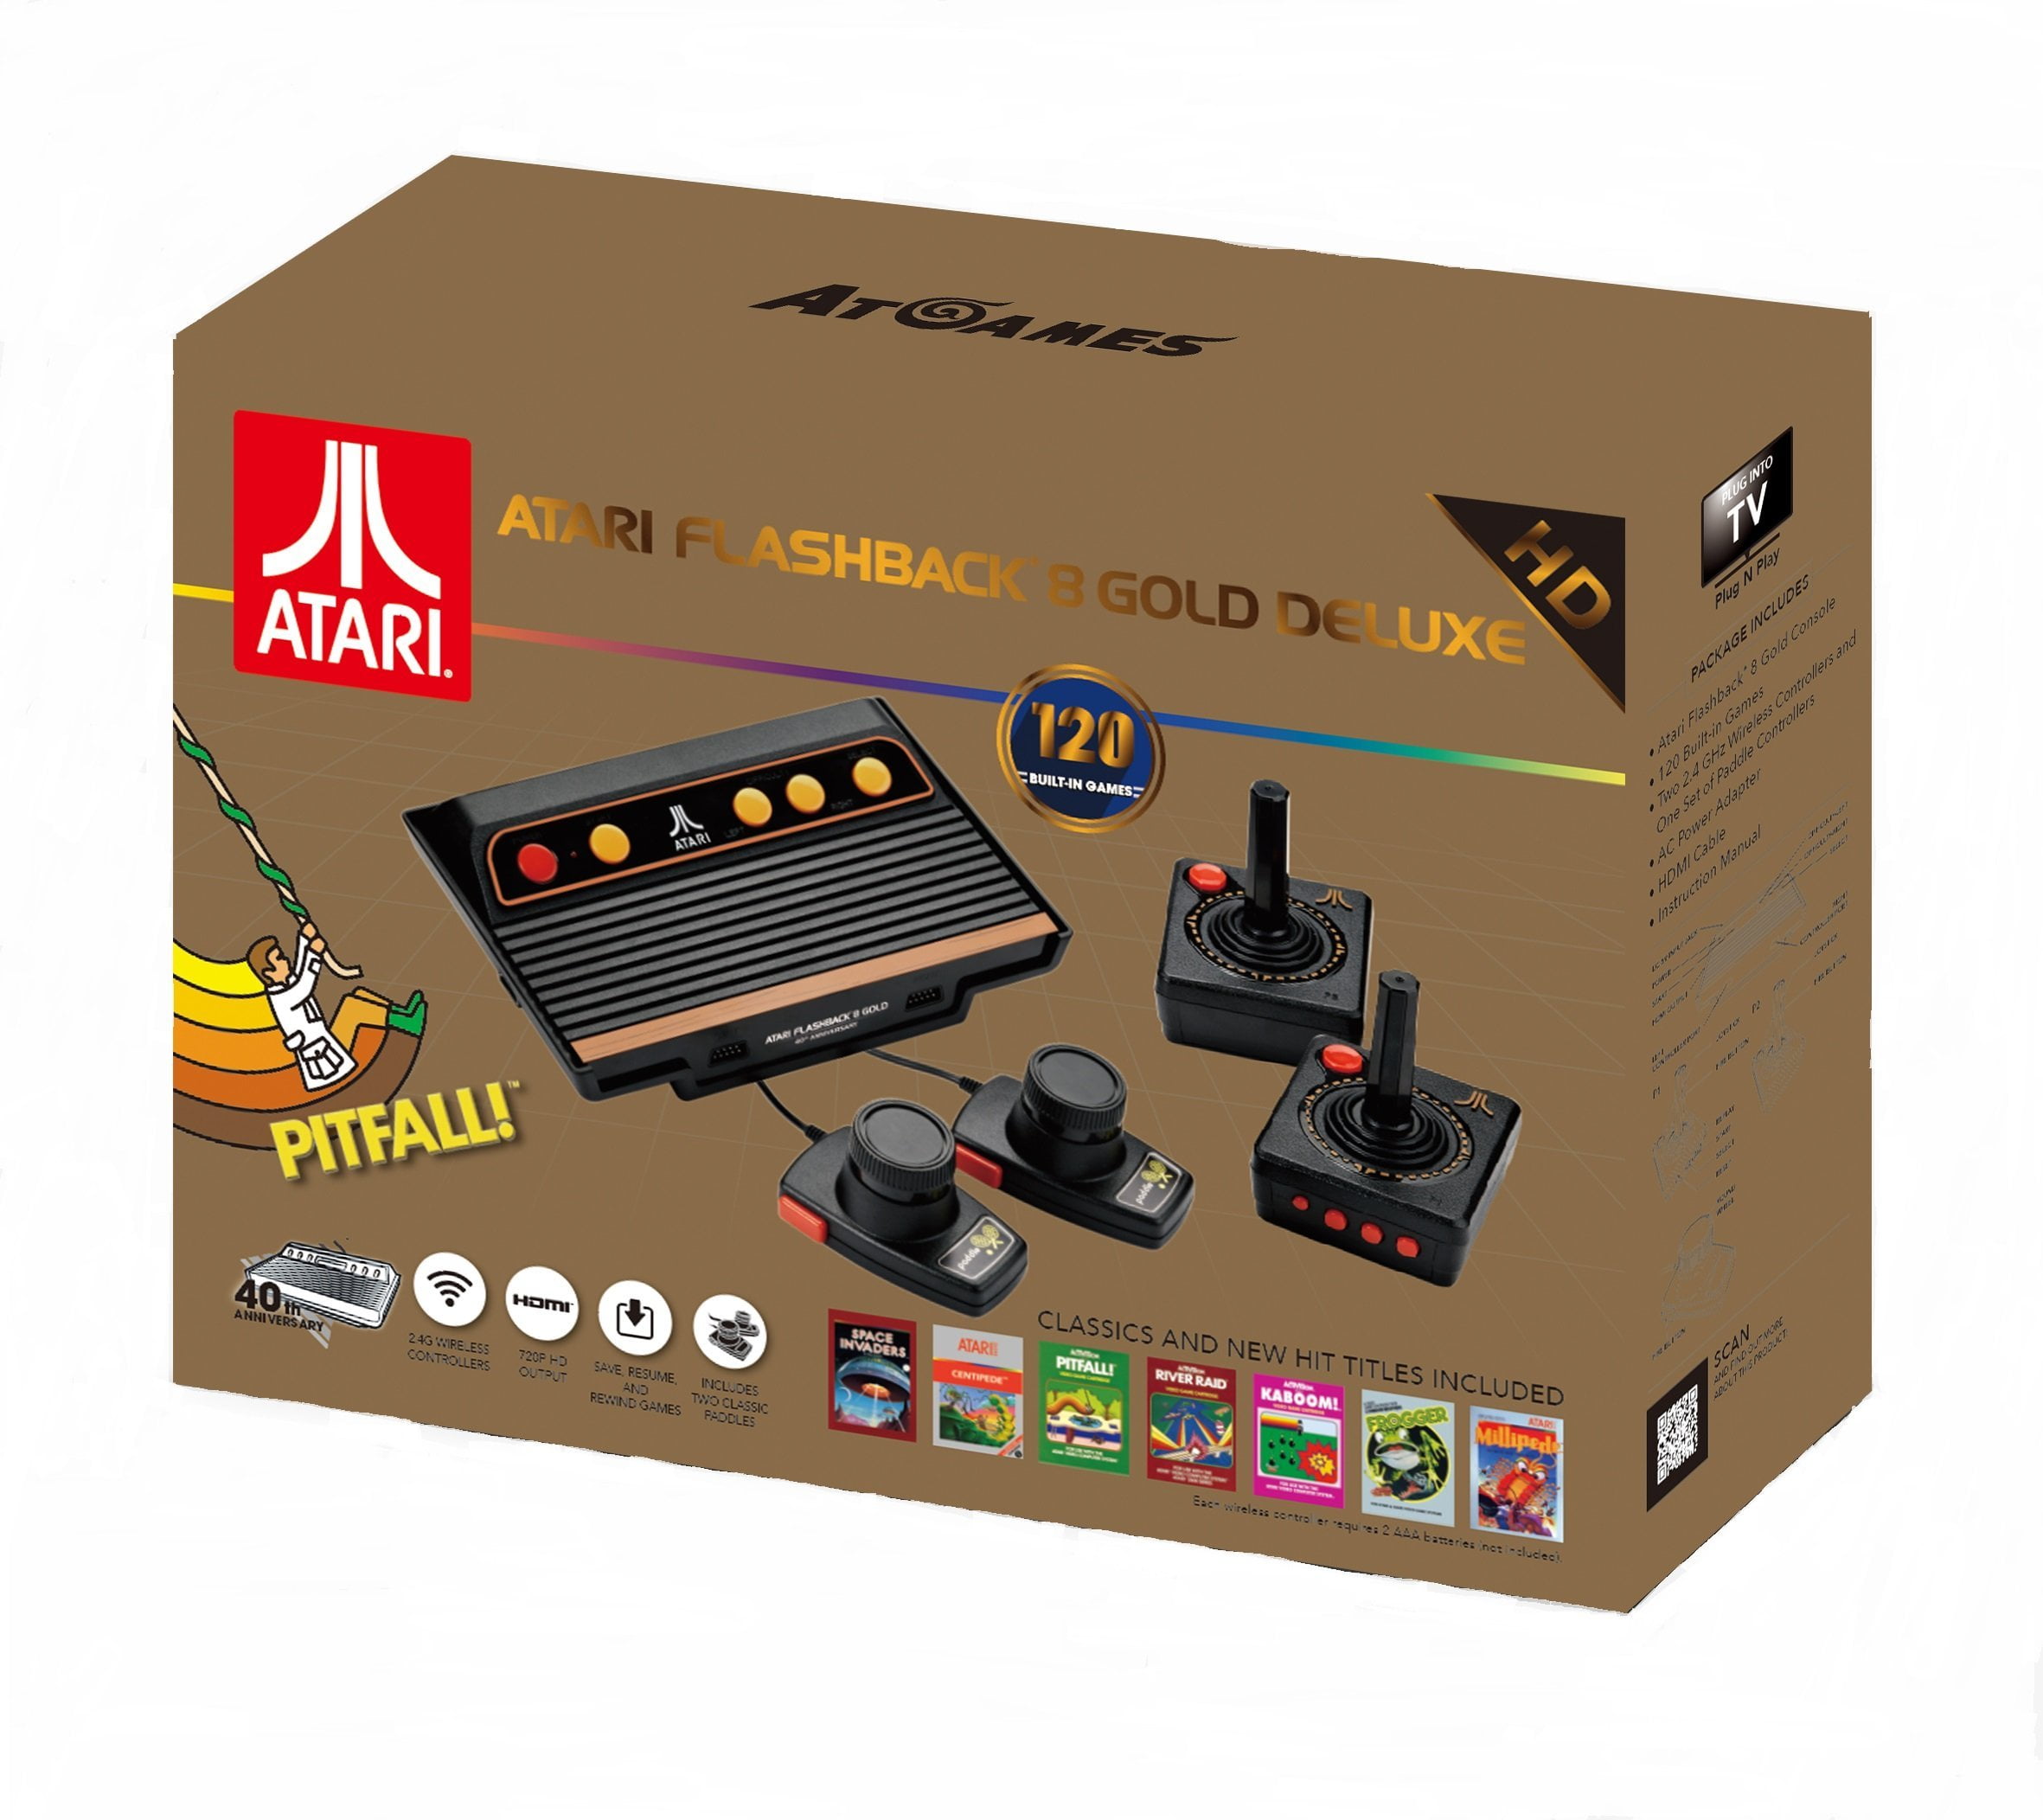 Atari Flashback 8 Gold DELUXE with 120 